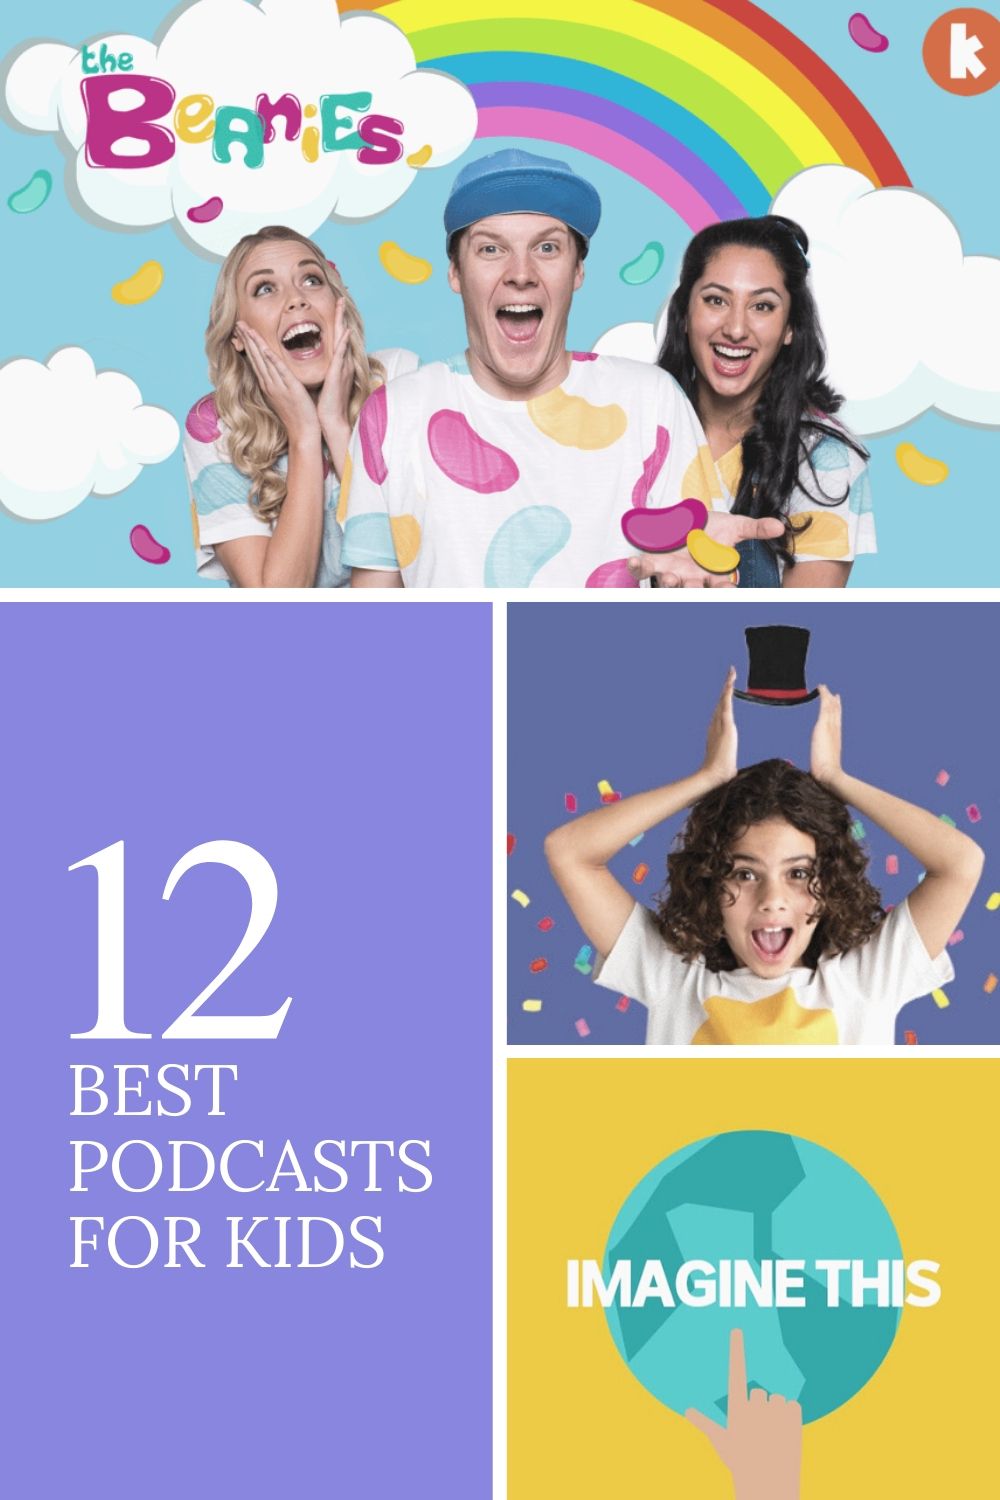 The 12 Best Podcasts for Kids